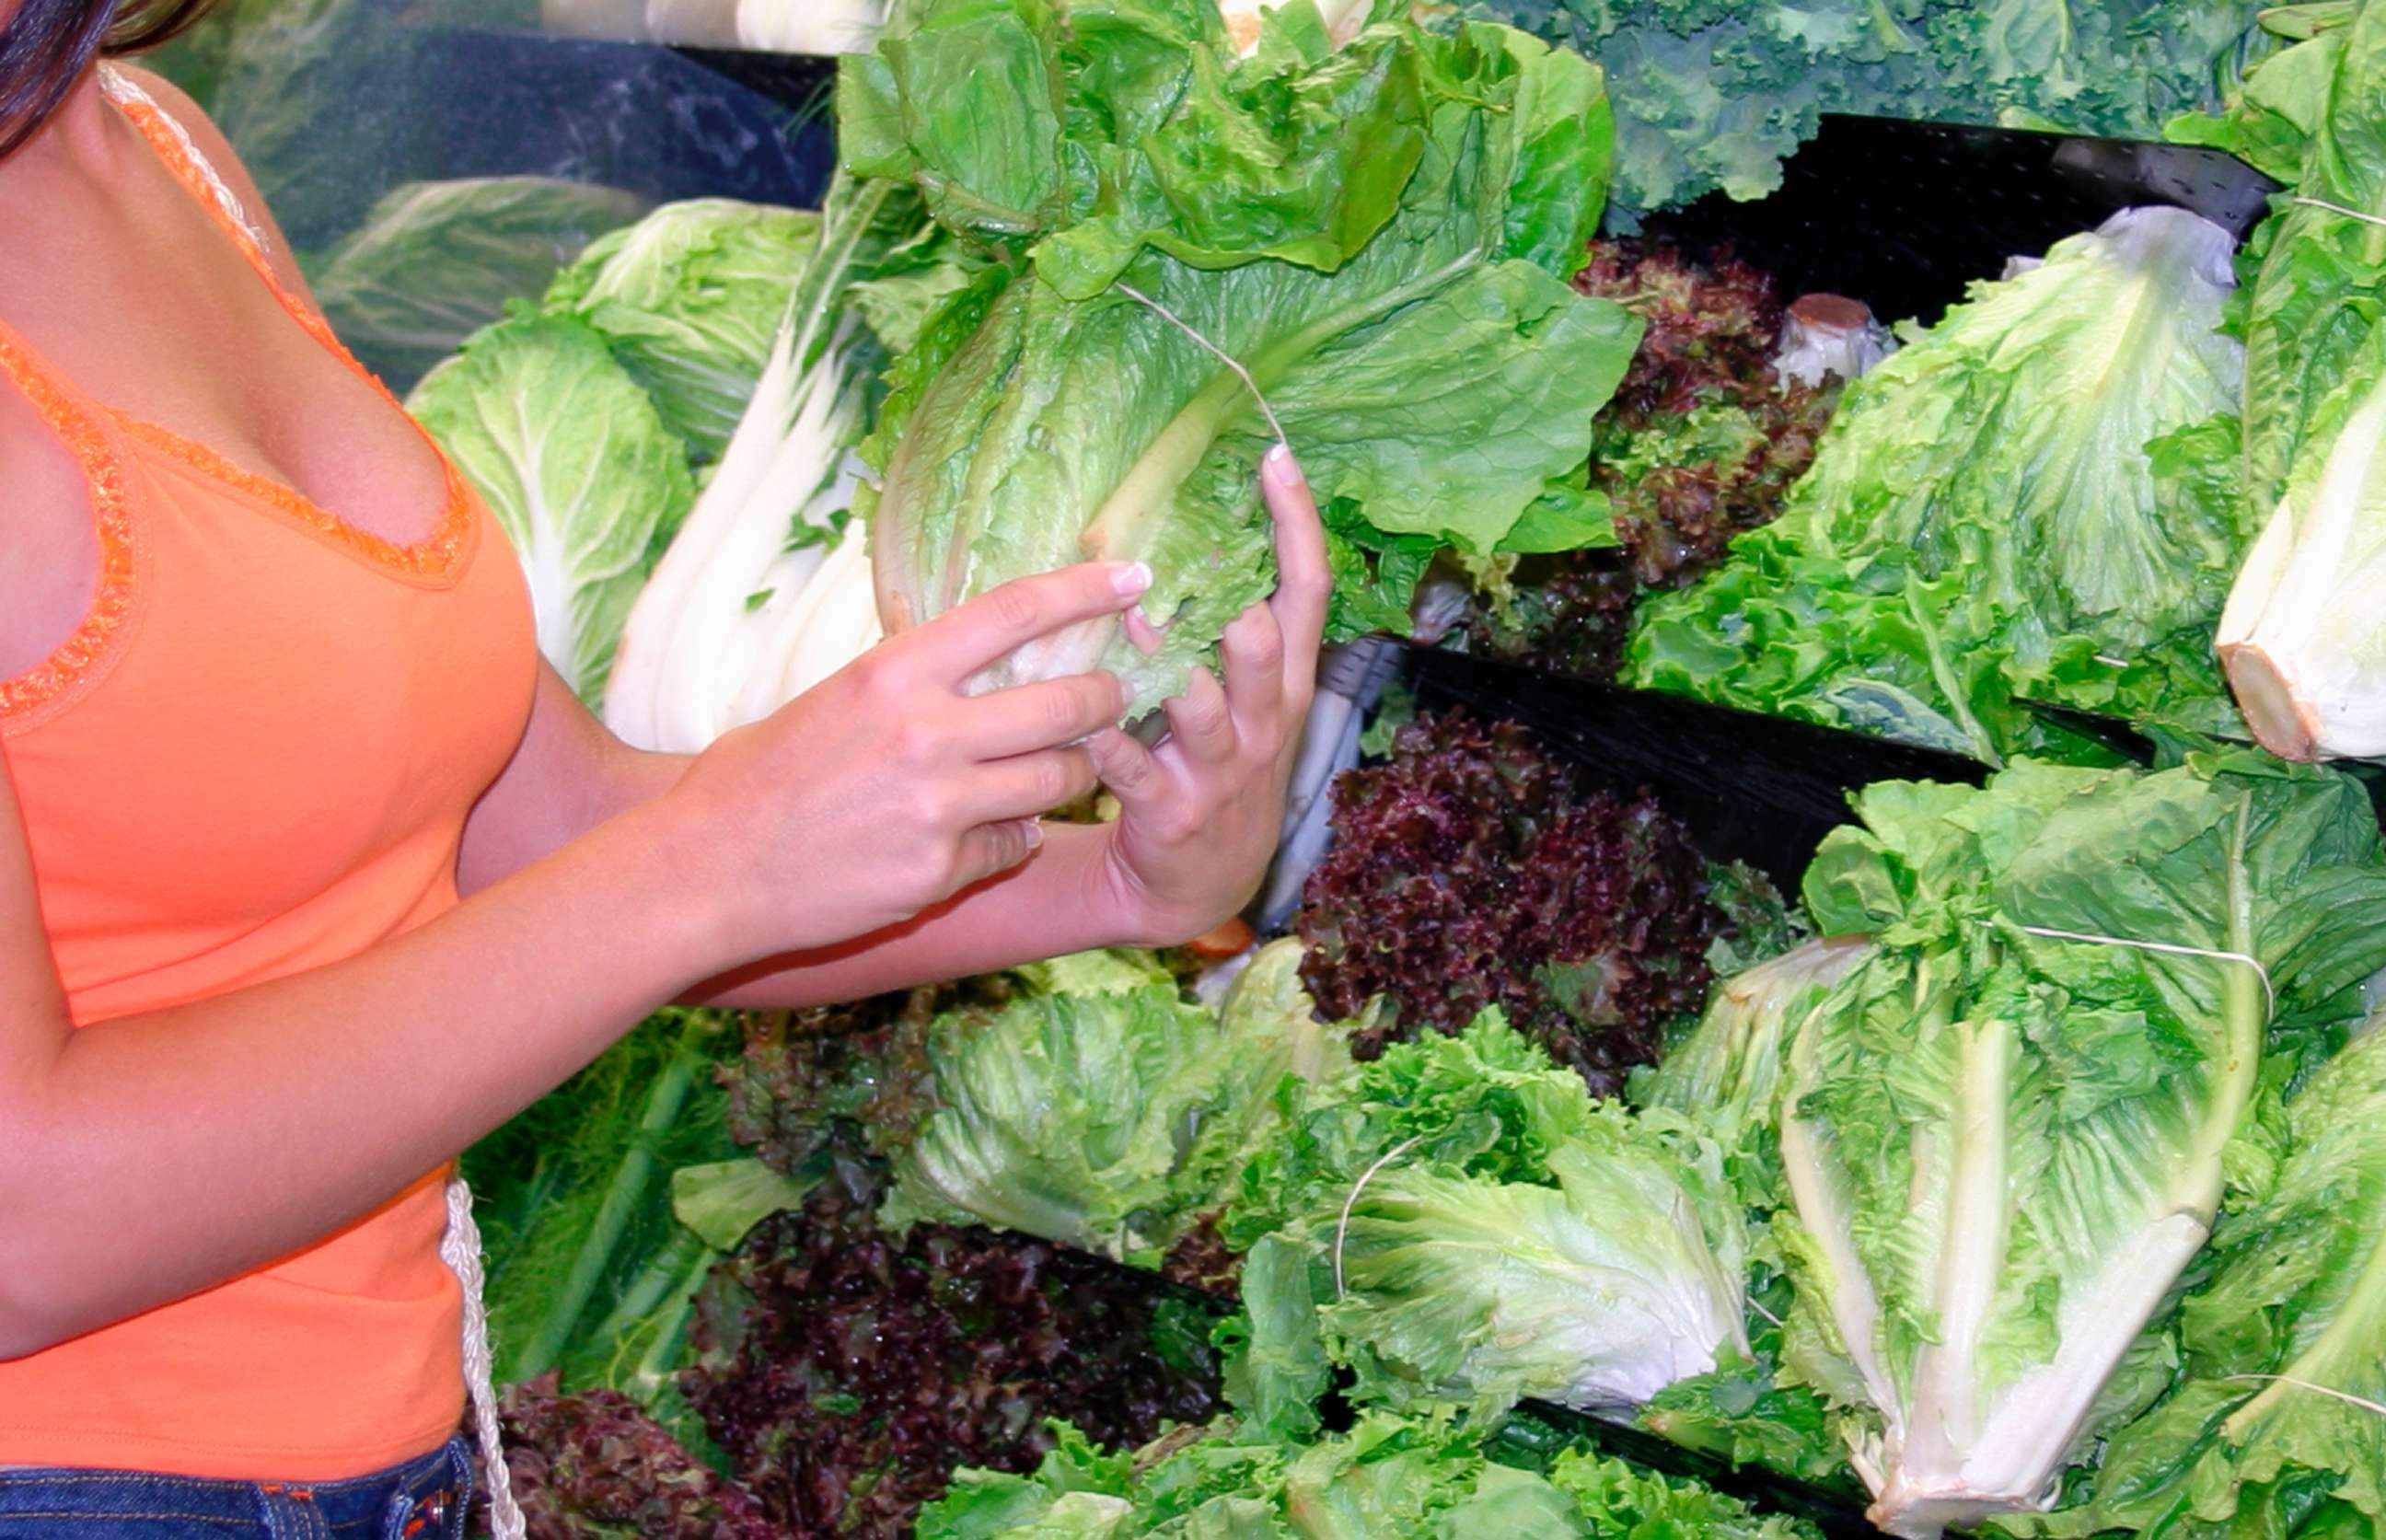 PHOTO: A woman is pictured holding romaine lettuce at a store.